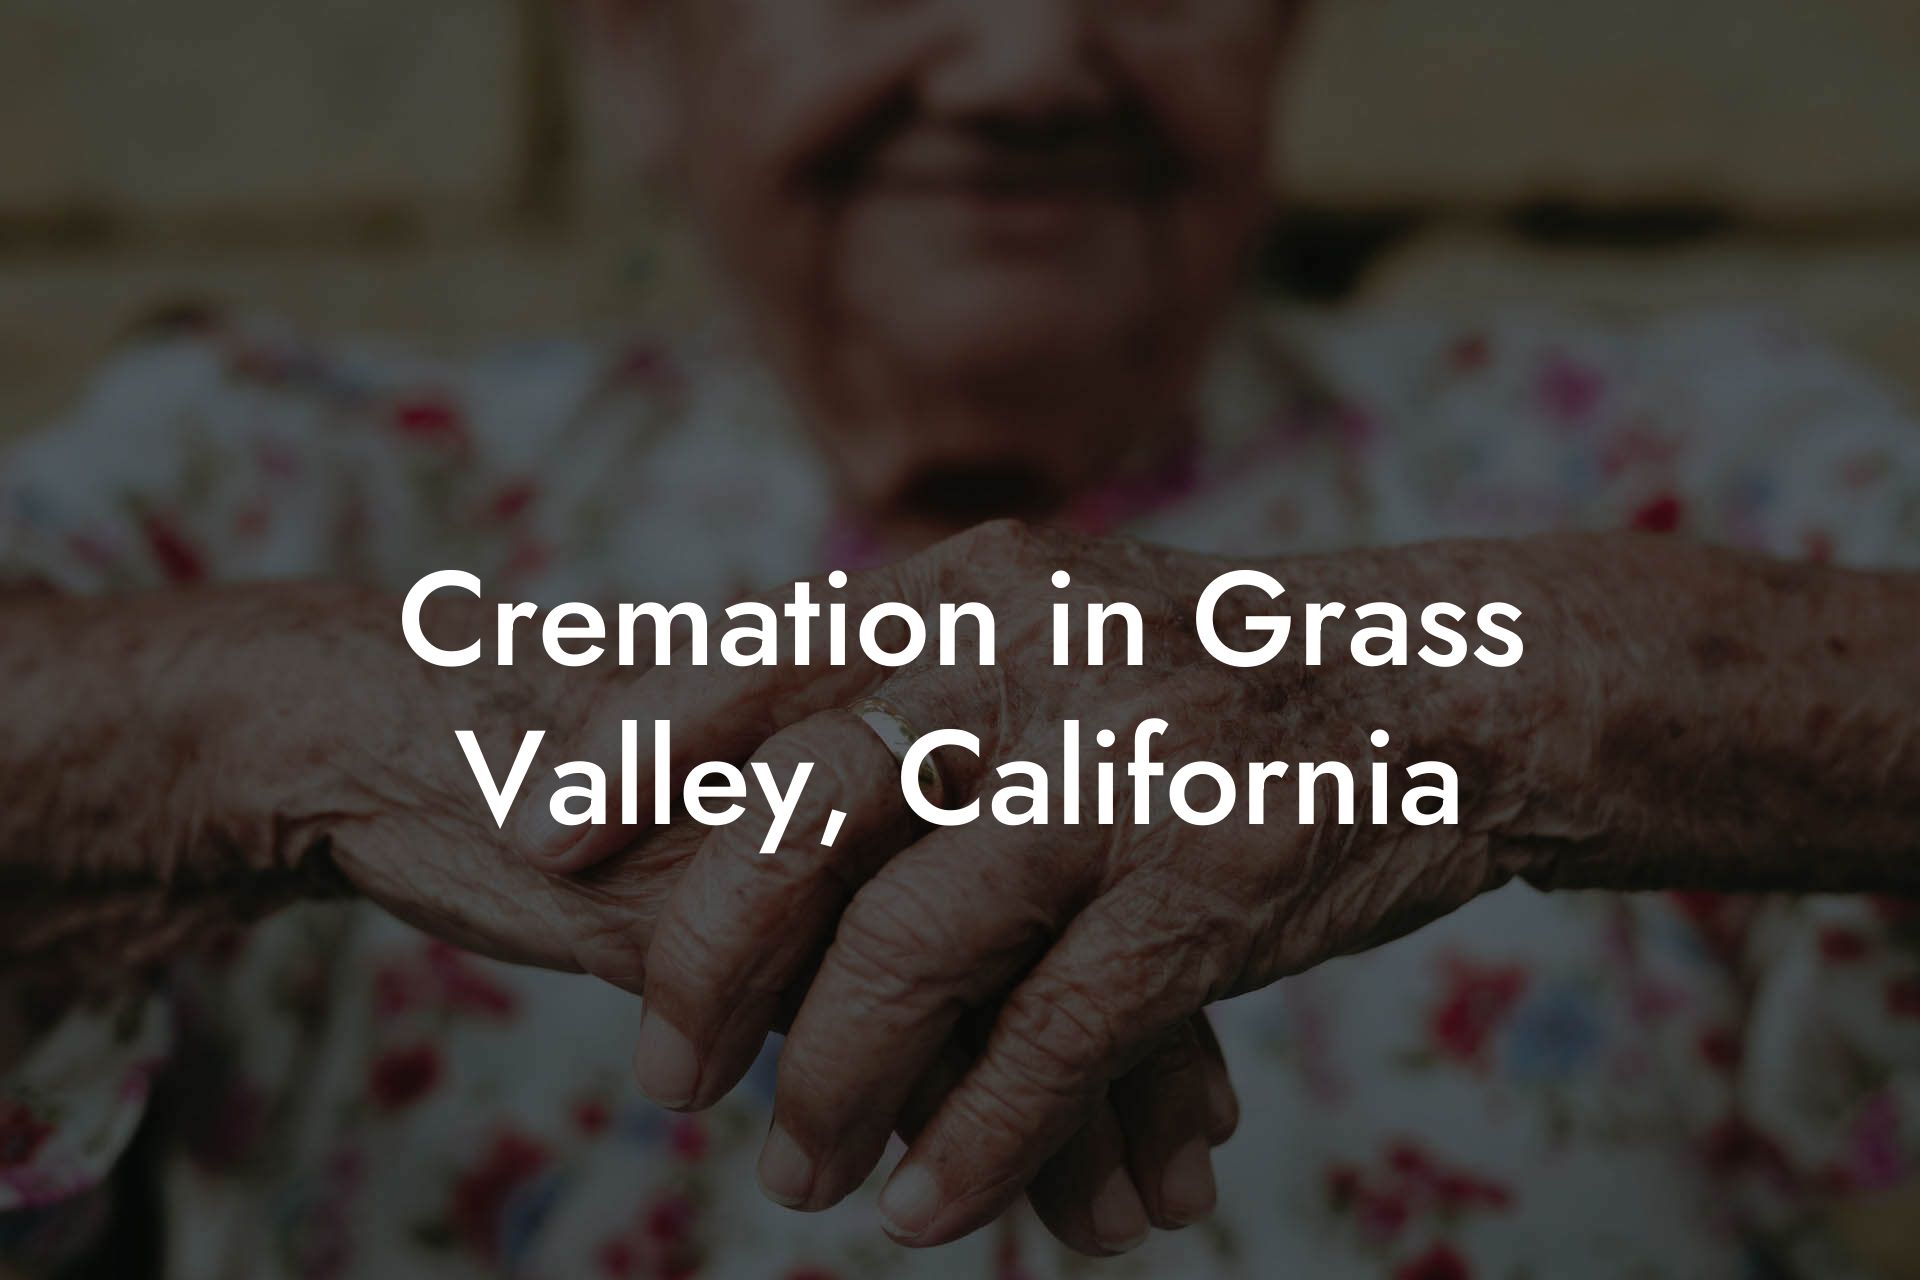 Cremation in Grass Valley, California